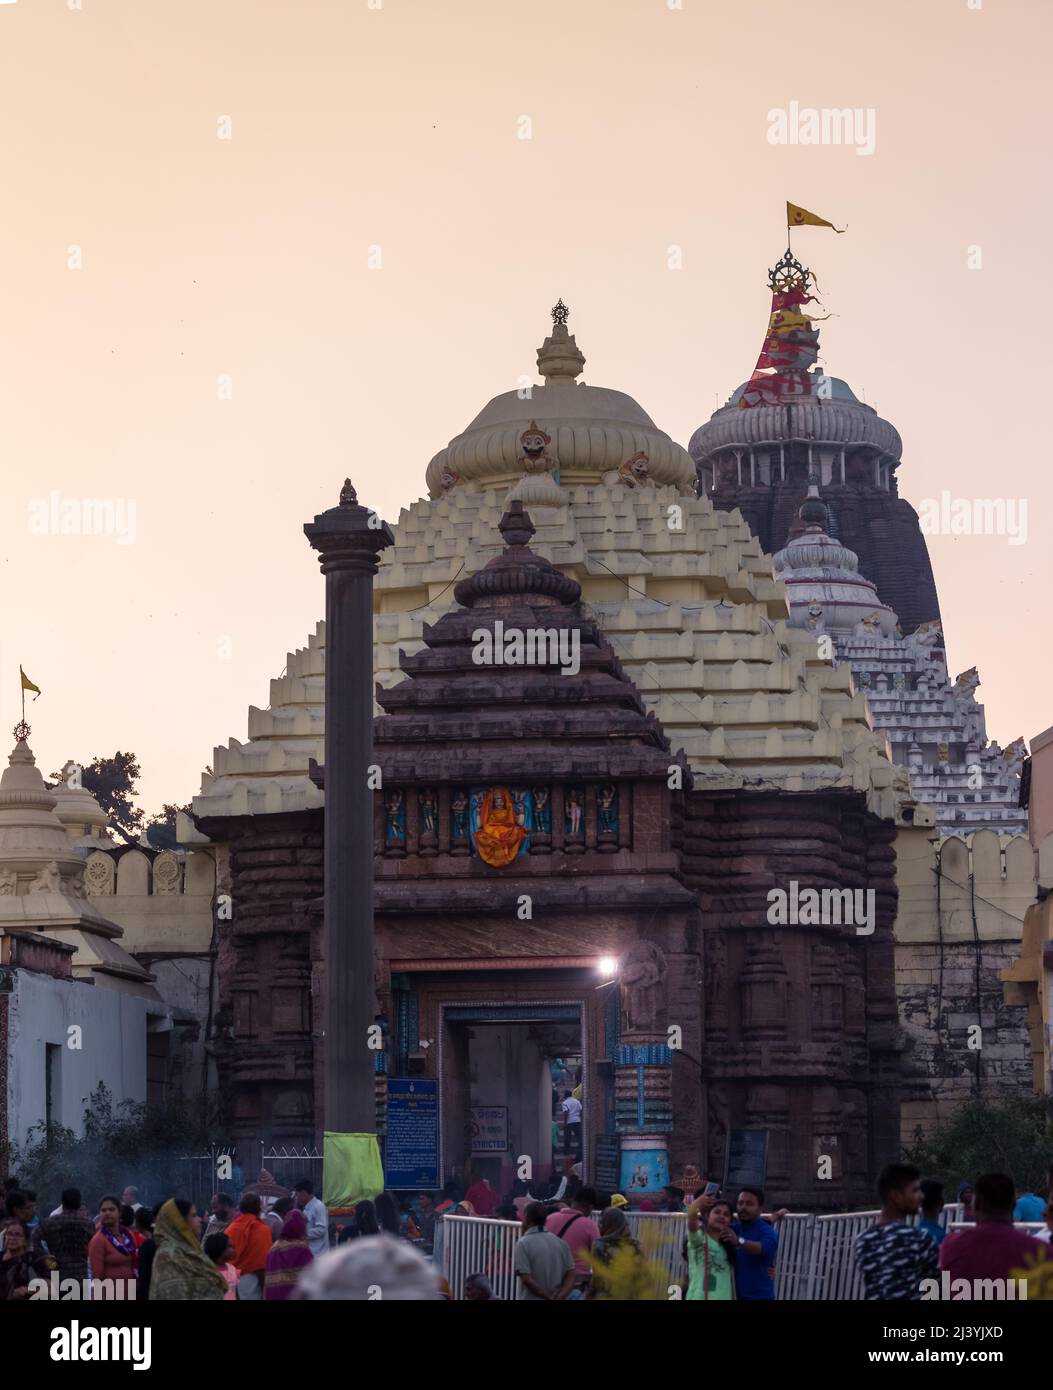 Devotees at the entrance of Main temple dome of Jagannath Temple, dedicated to Jagannath or Lord Vishnu in the coastal town of Puri, Odisha, India. Stock Photo